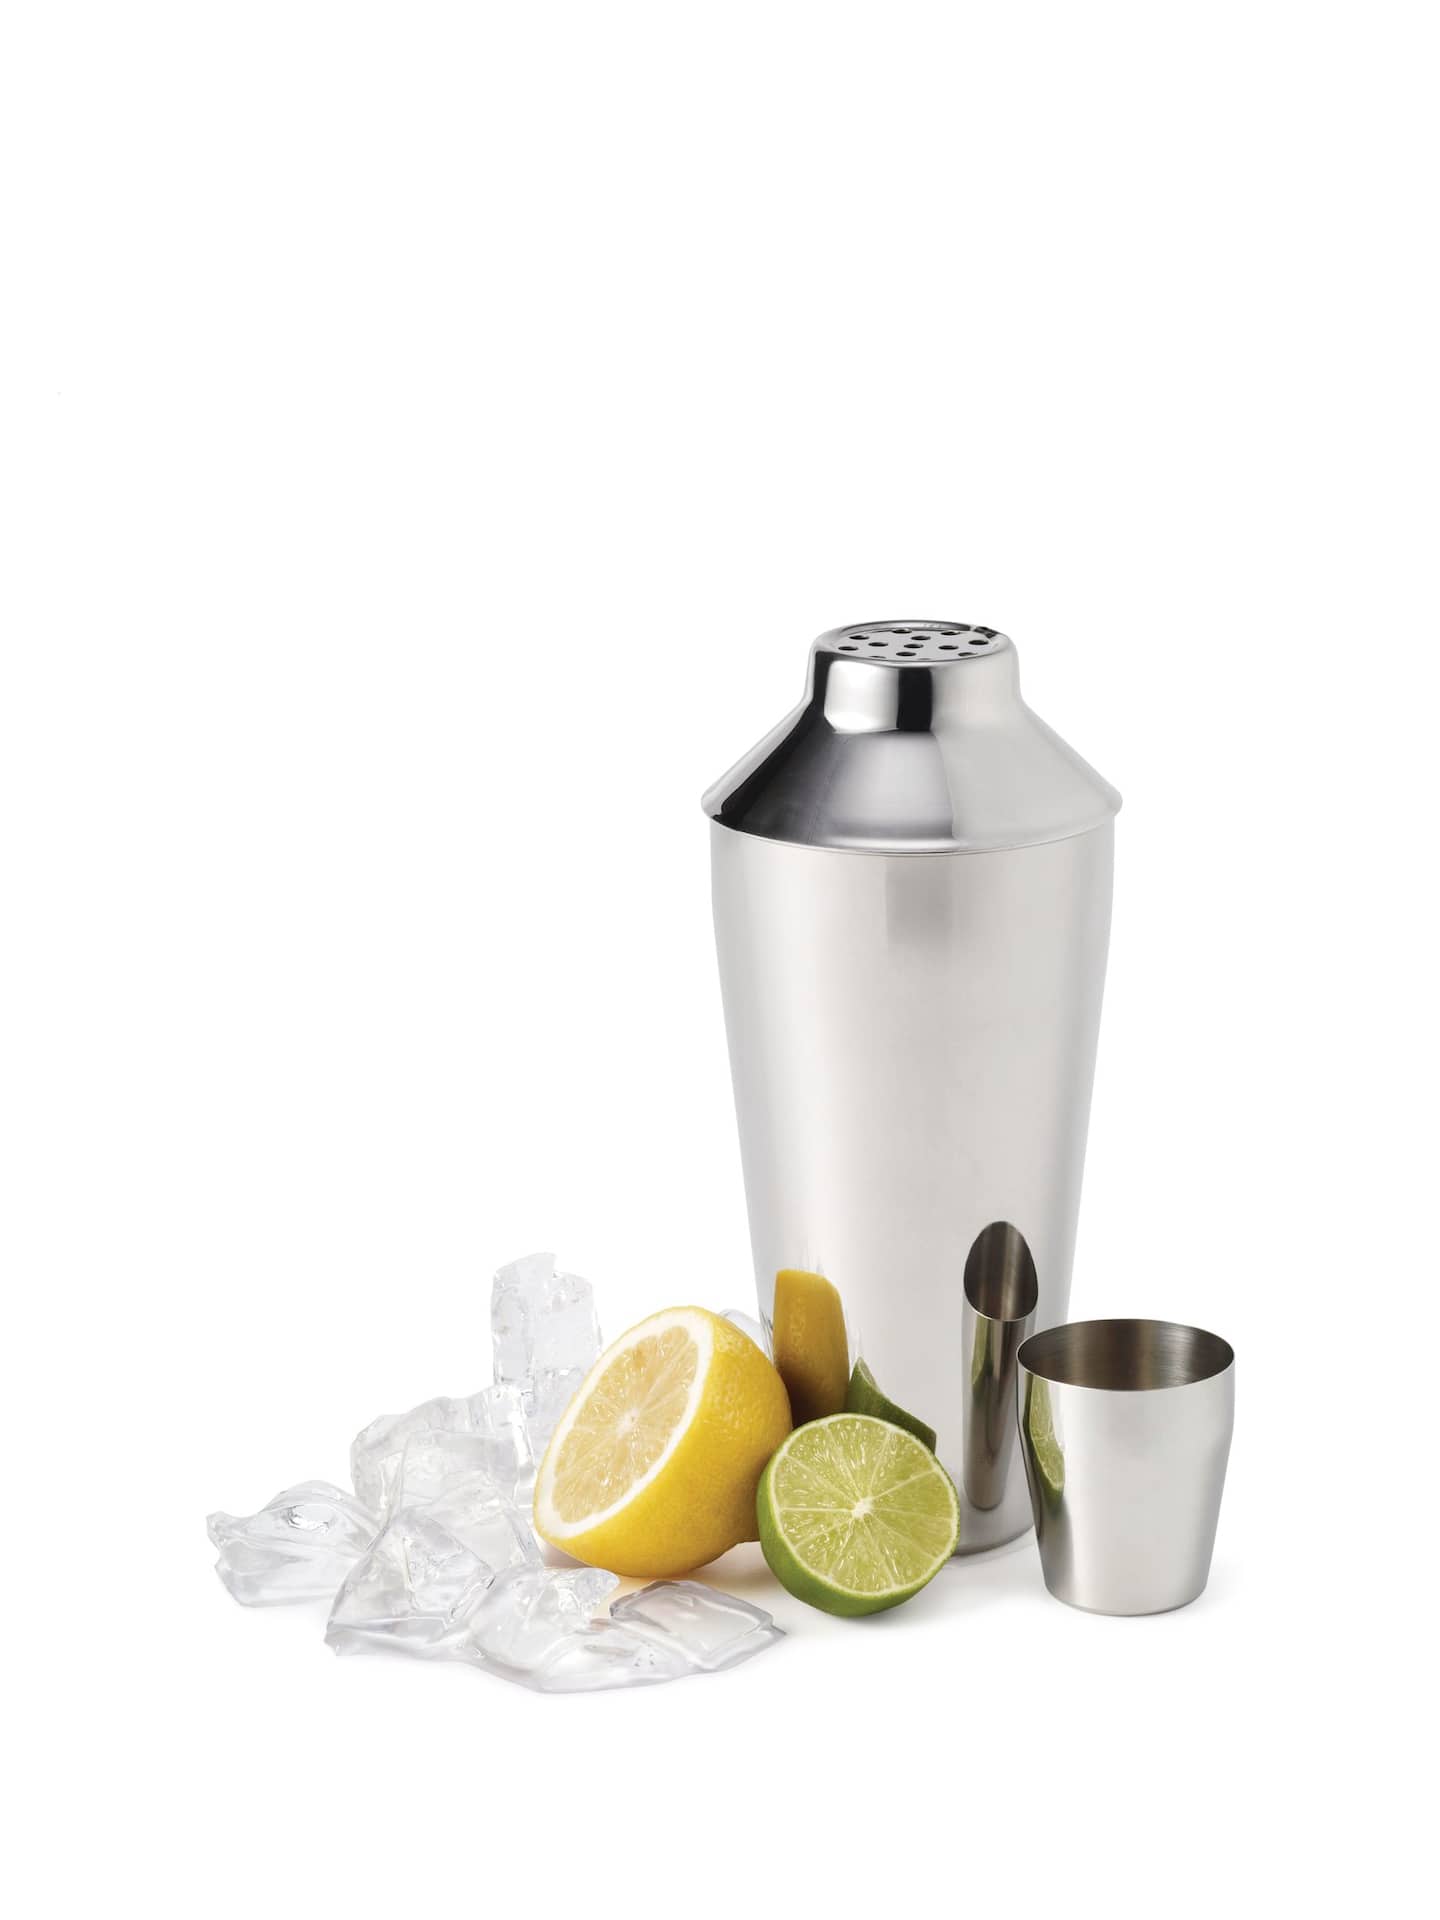 https://media-www.canadiantire.ca/product/living/kitchen/dining-and-entertaining/1423819/stainless-steel-cocktail-shaker-bad00df7-b6af-4cb8-8265-63be003bc71b-jpgrendition.jpg